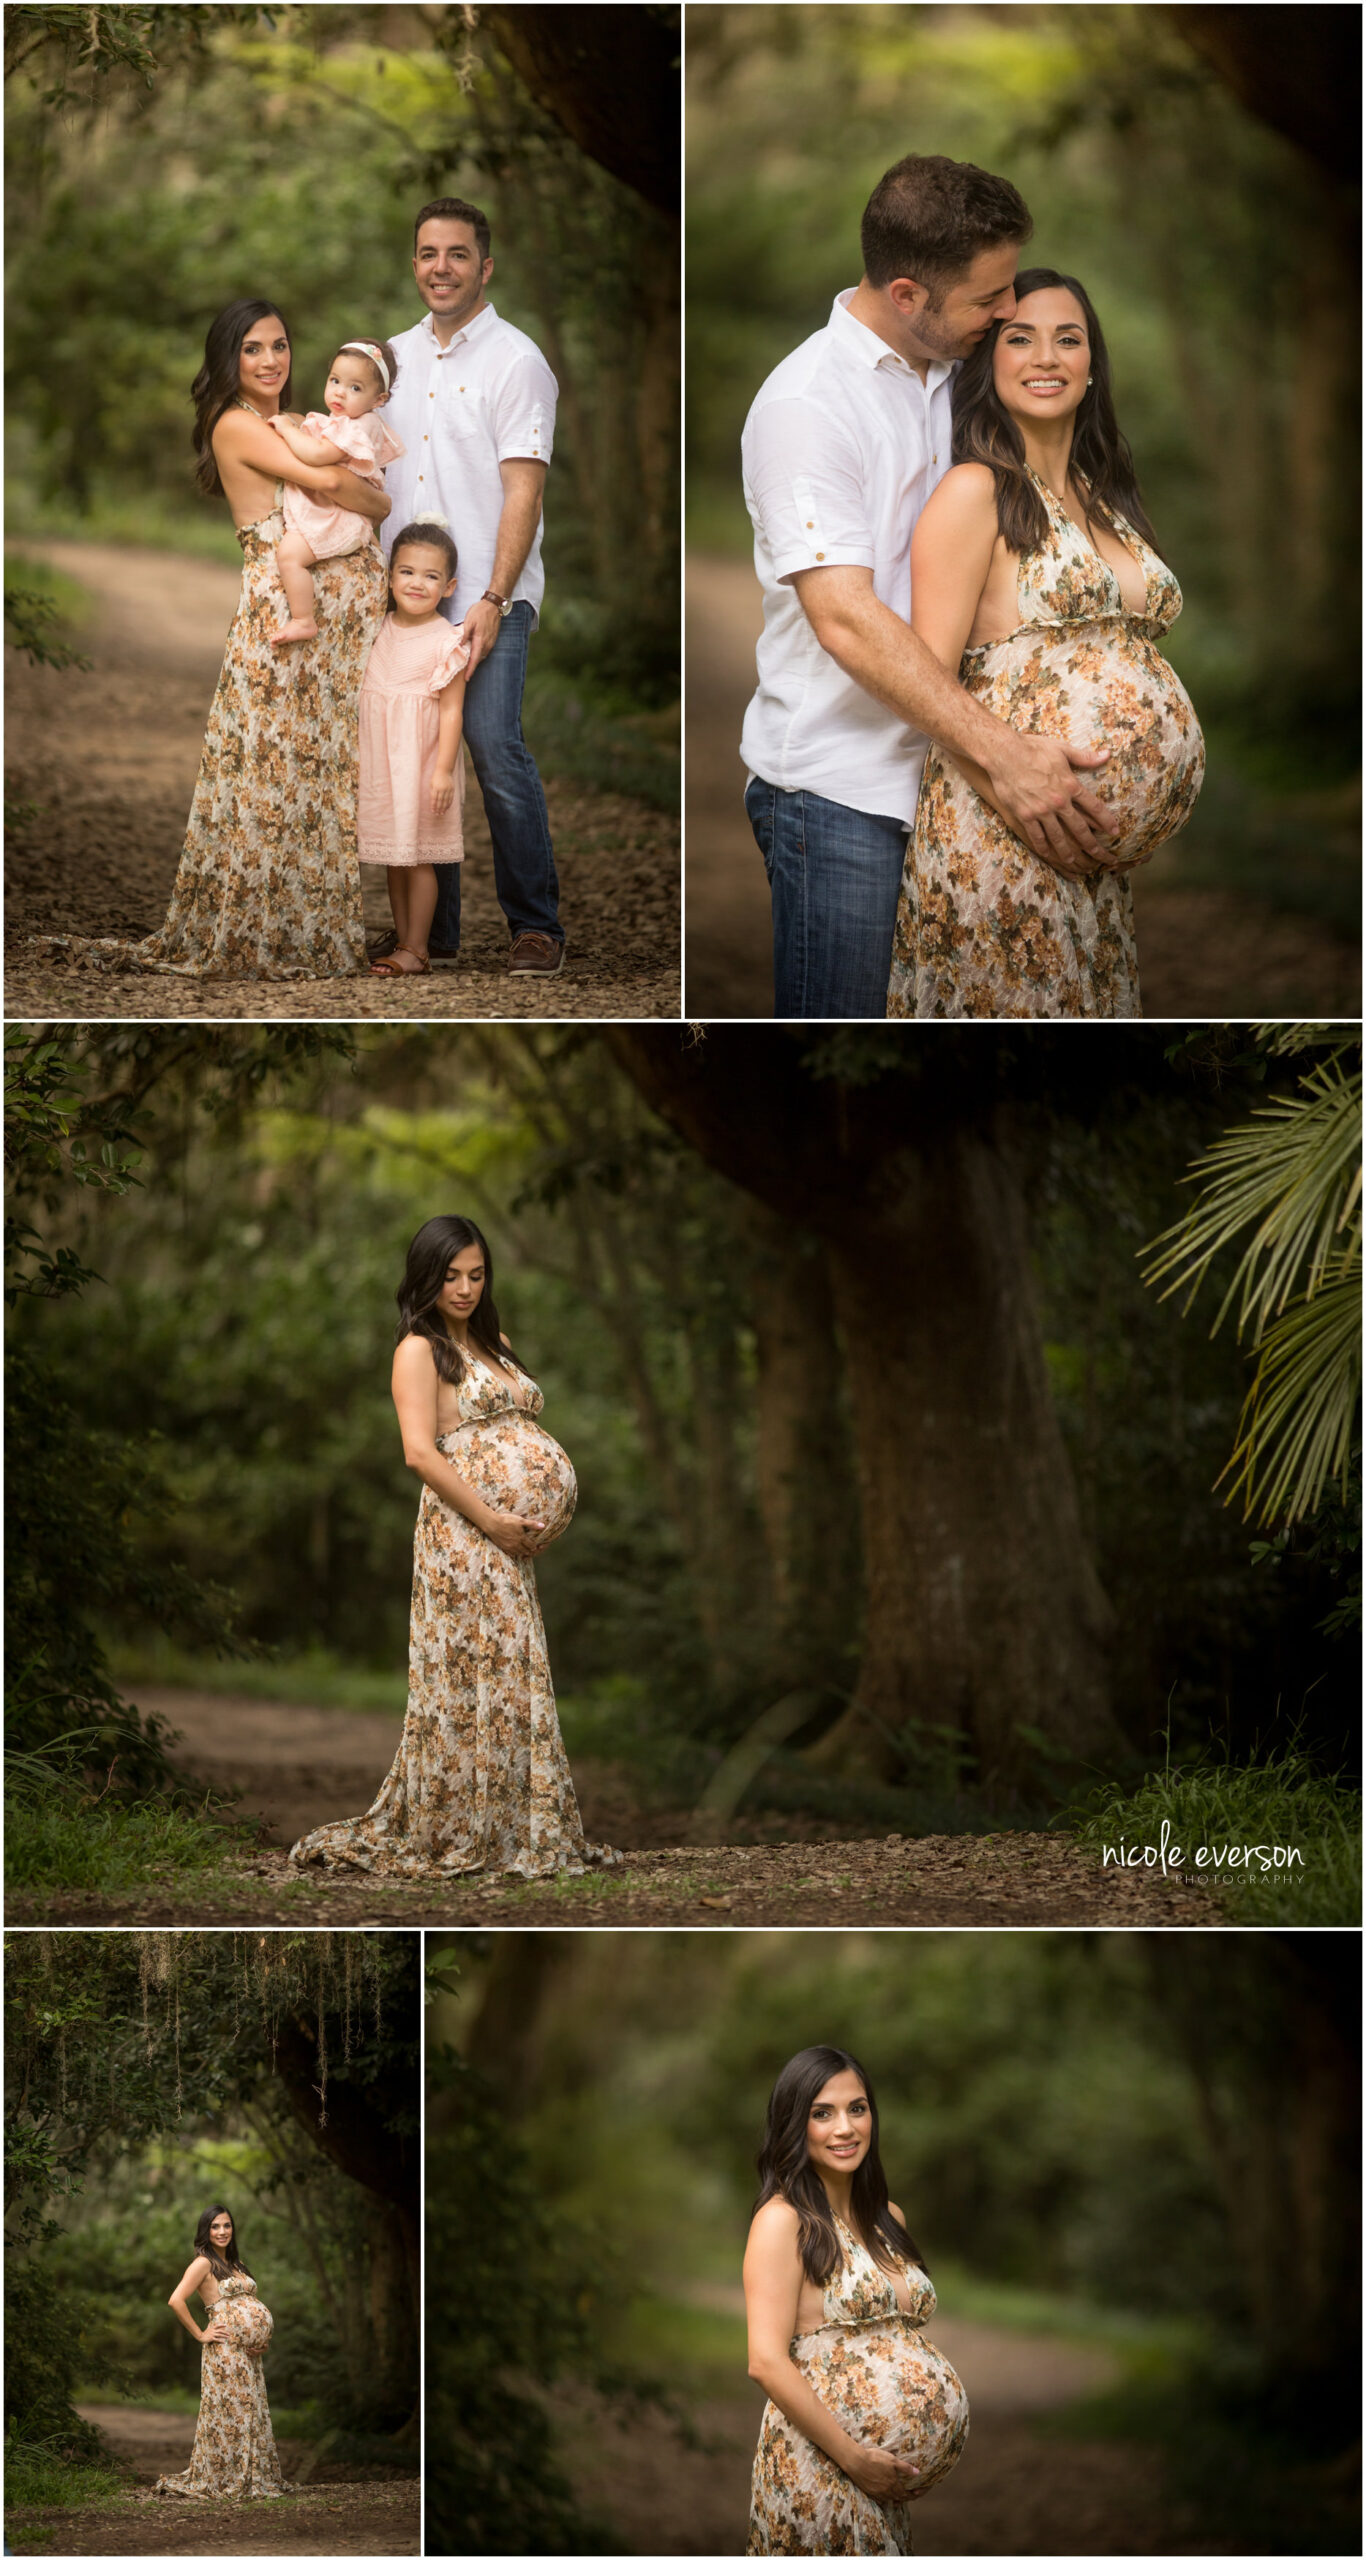 maternity photo ideas and poses